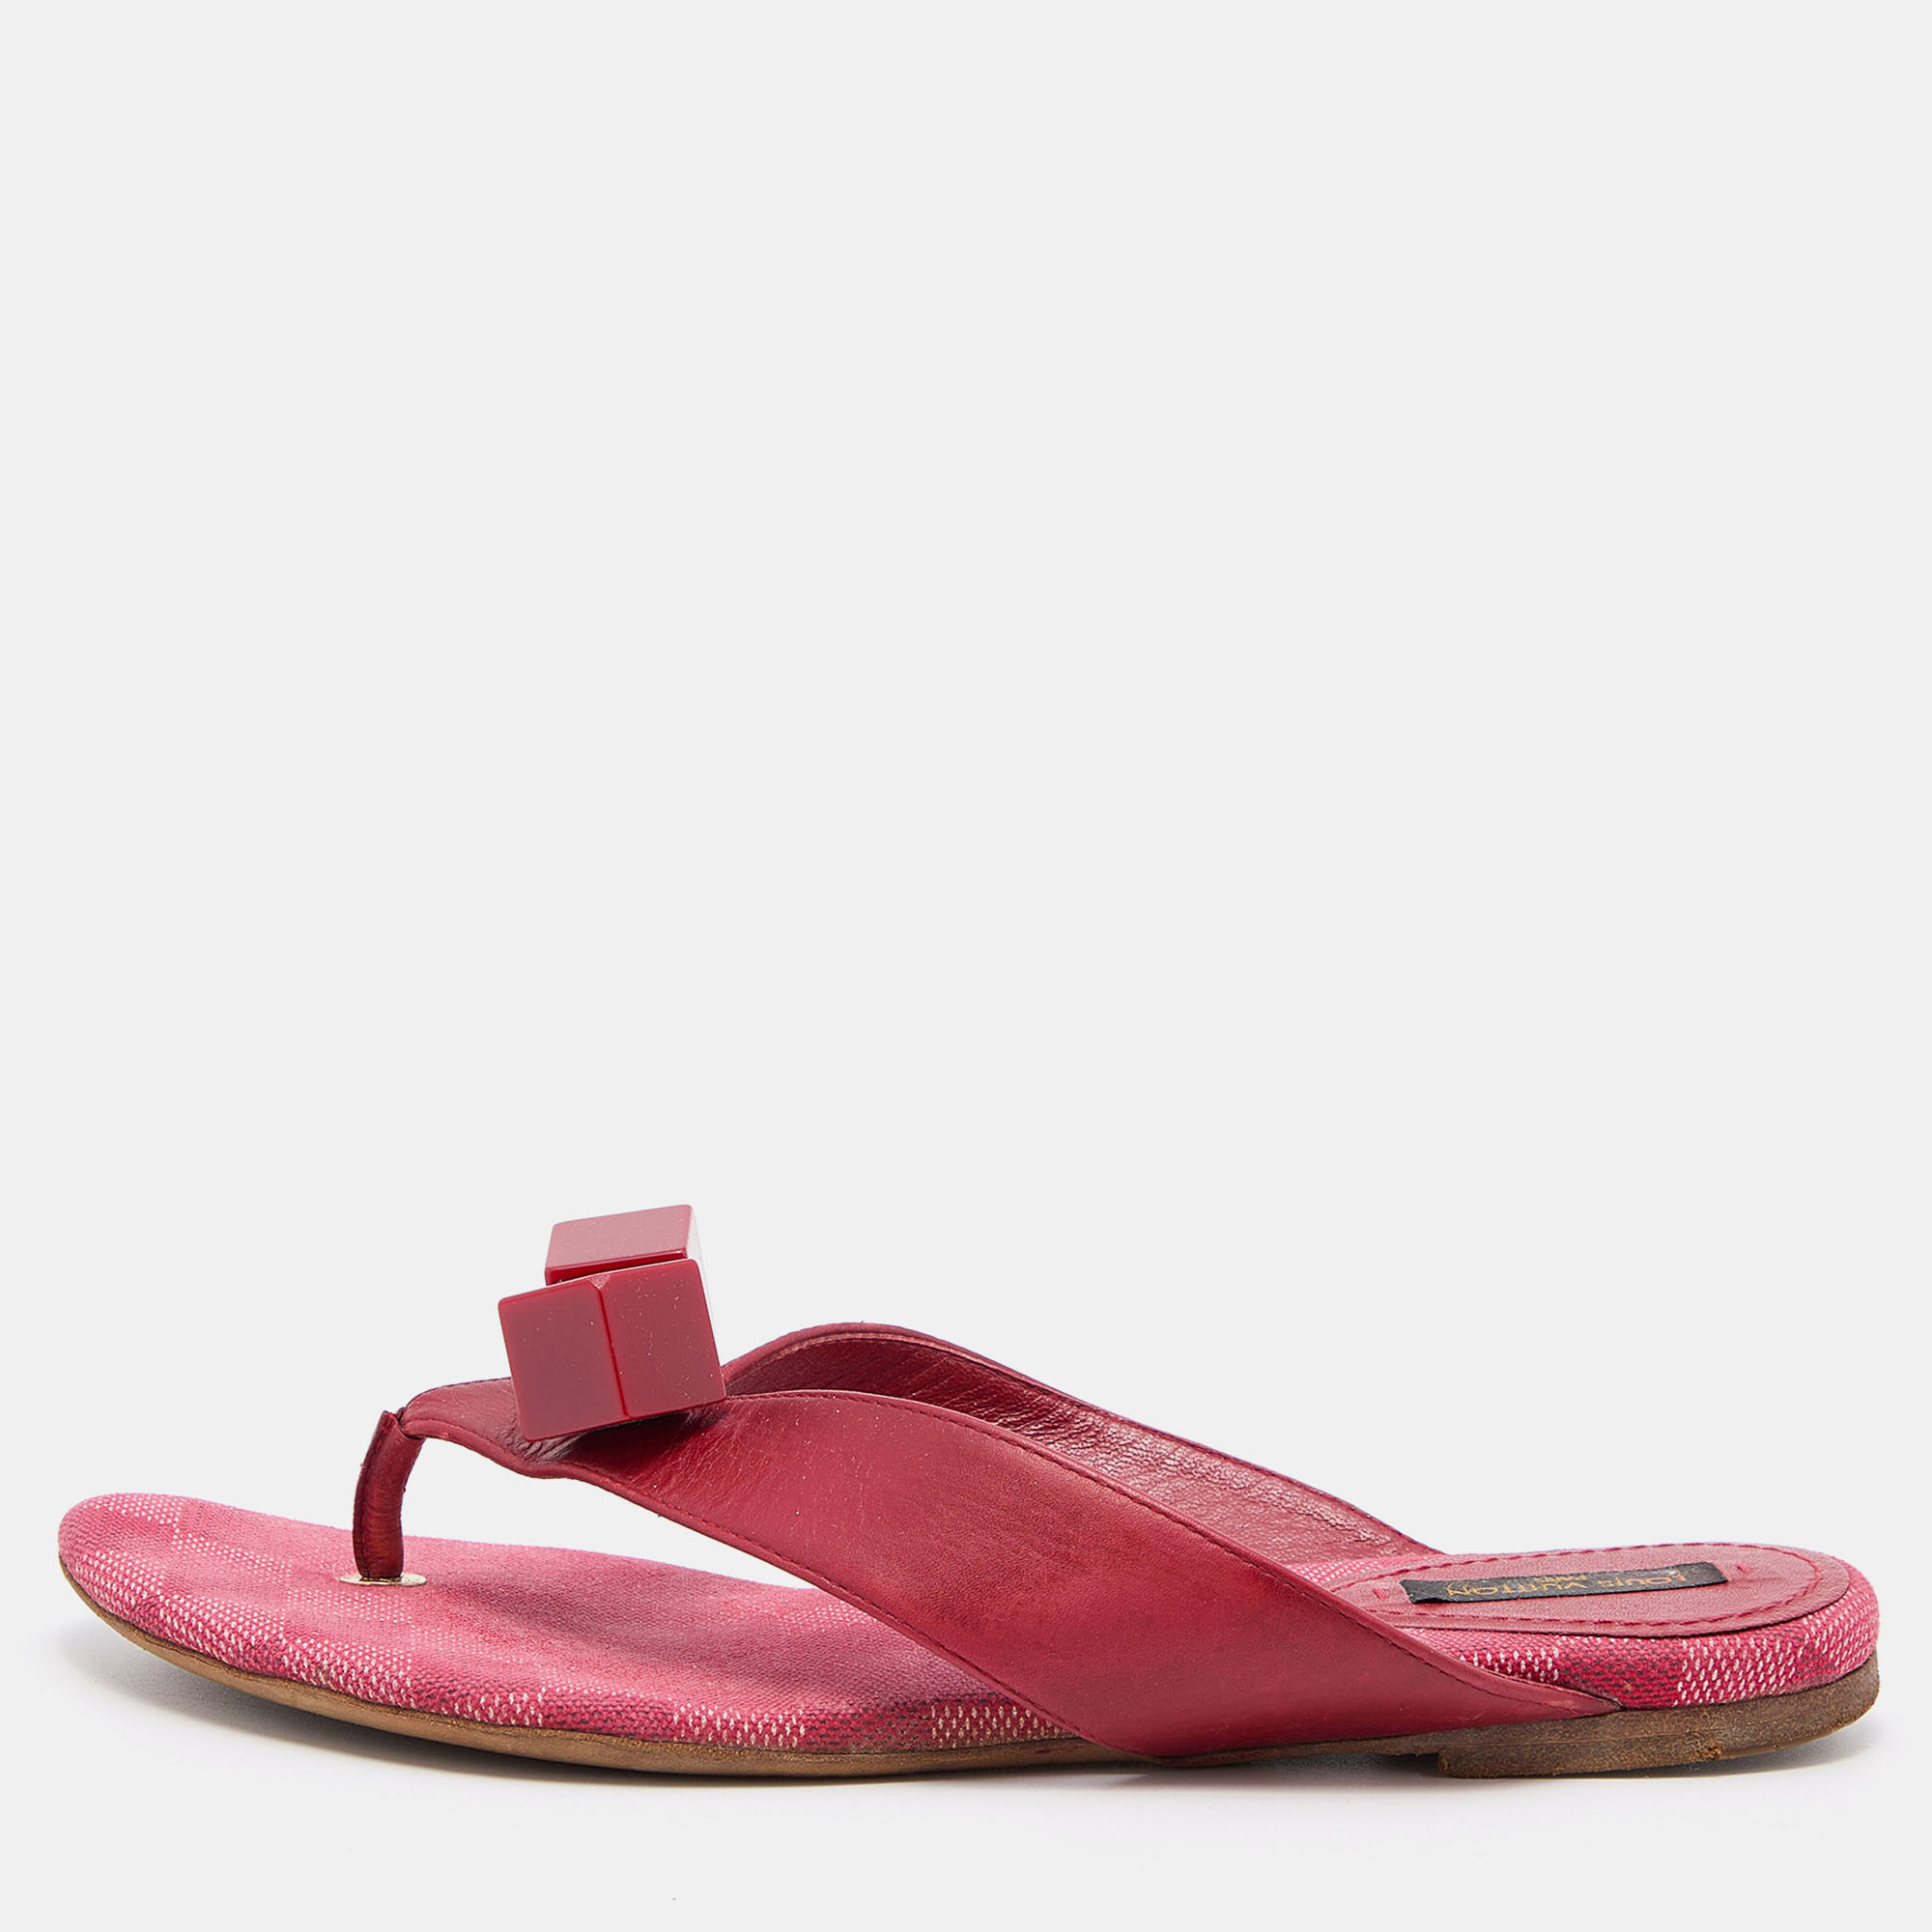 Louis vuitton red leather cube thong flat slides size 38.5